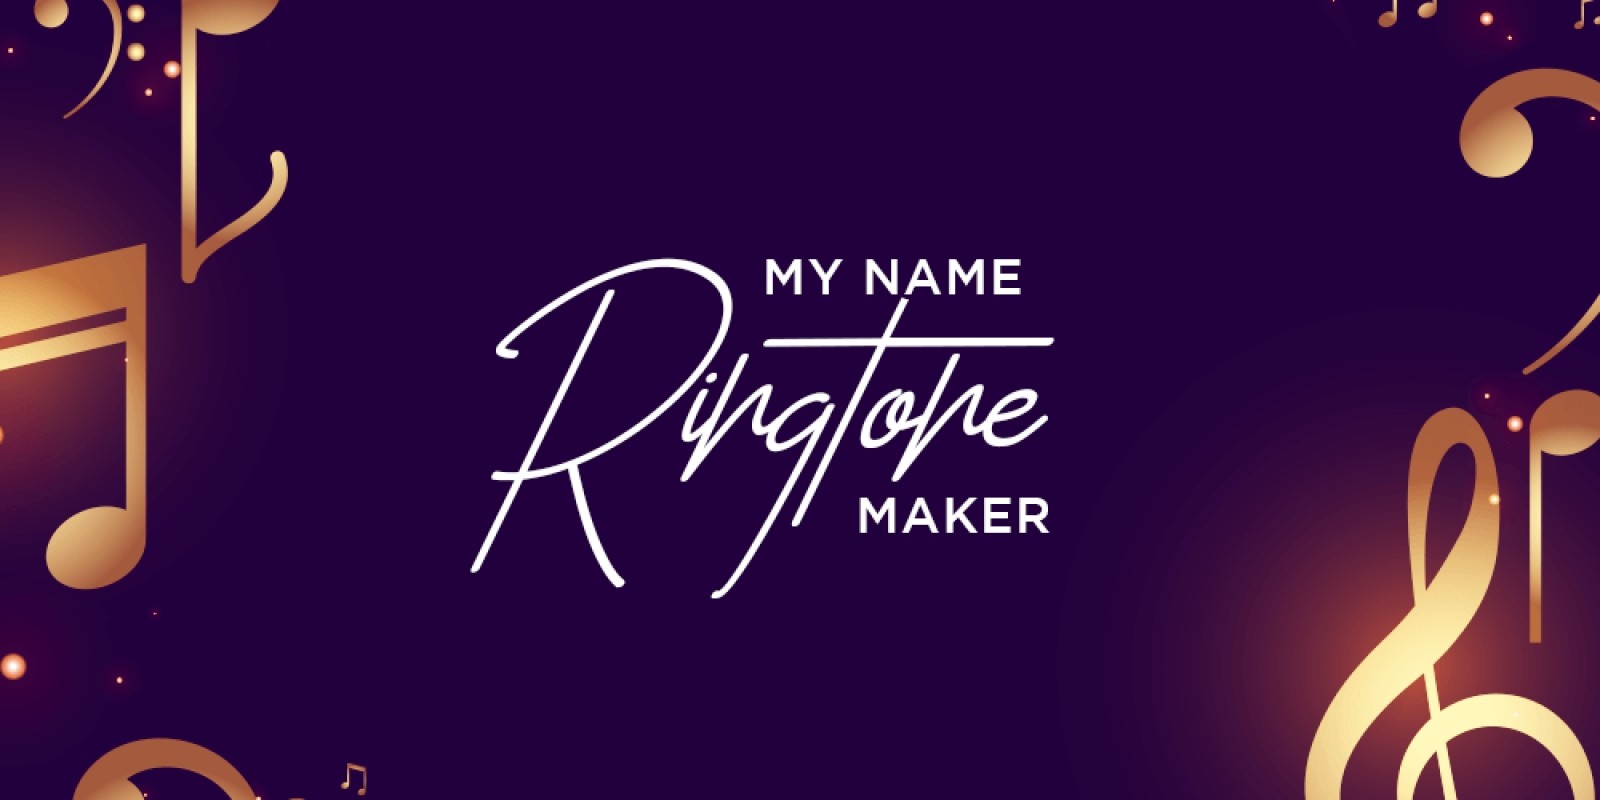 My name ringtone maker app for android free download